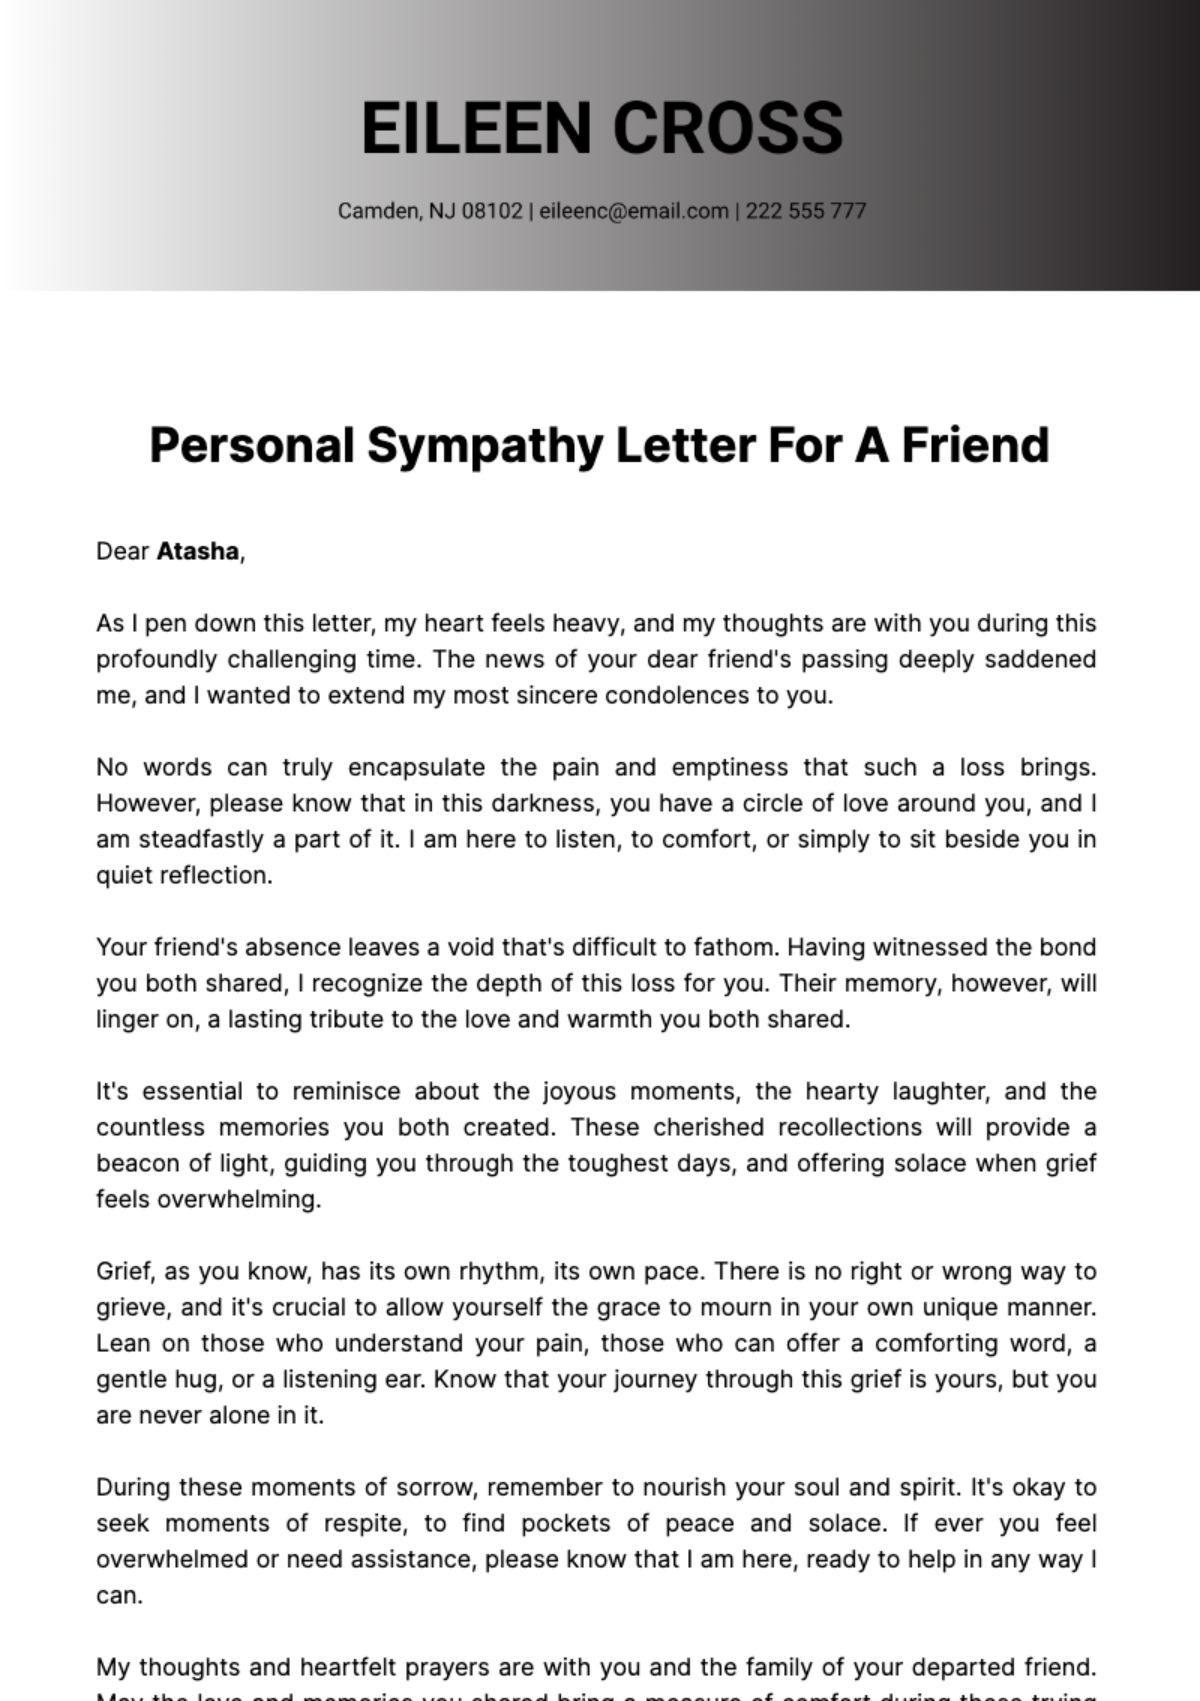 Personal Sympathy Letter For A Friend  Template